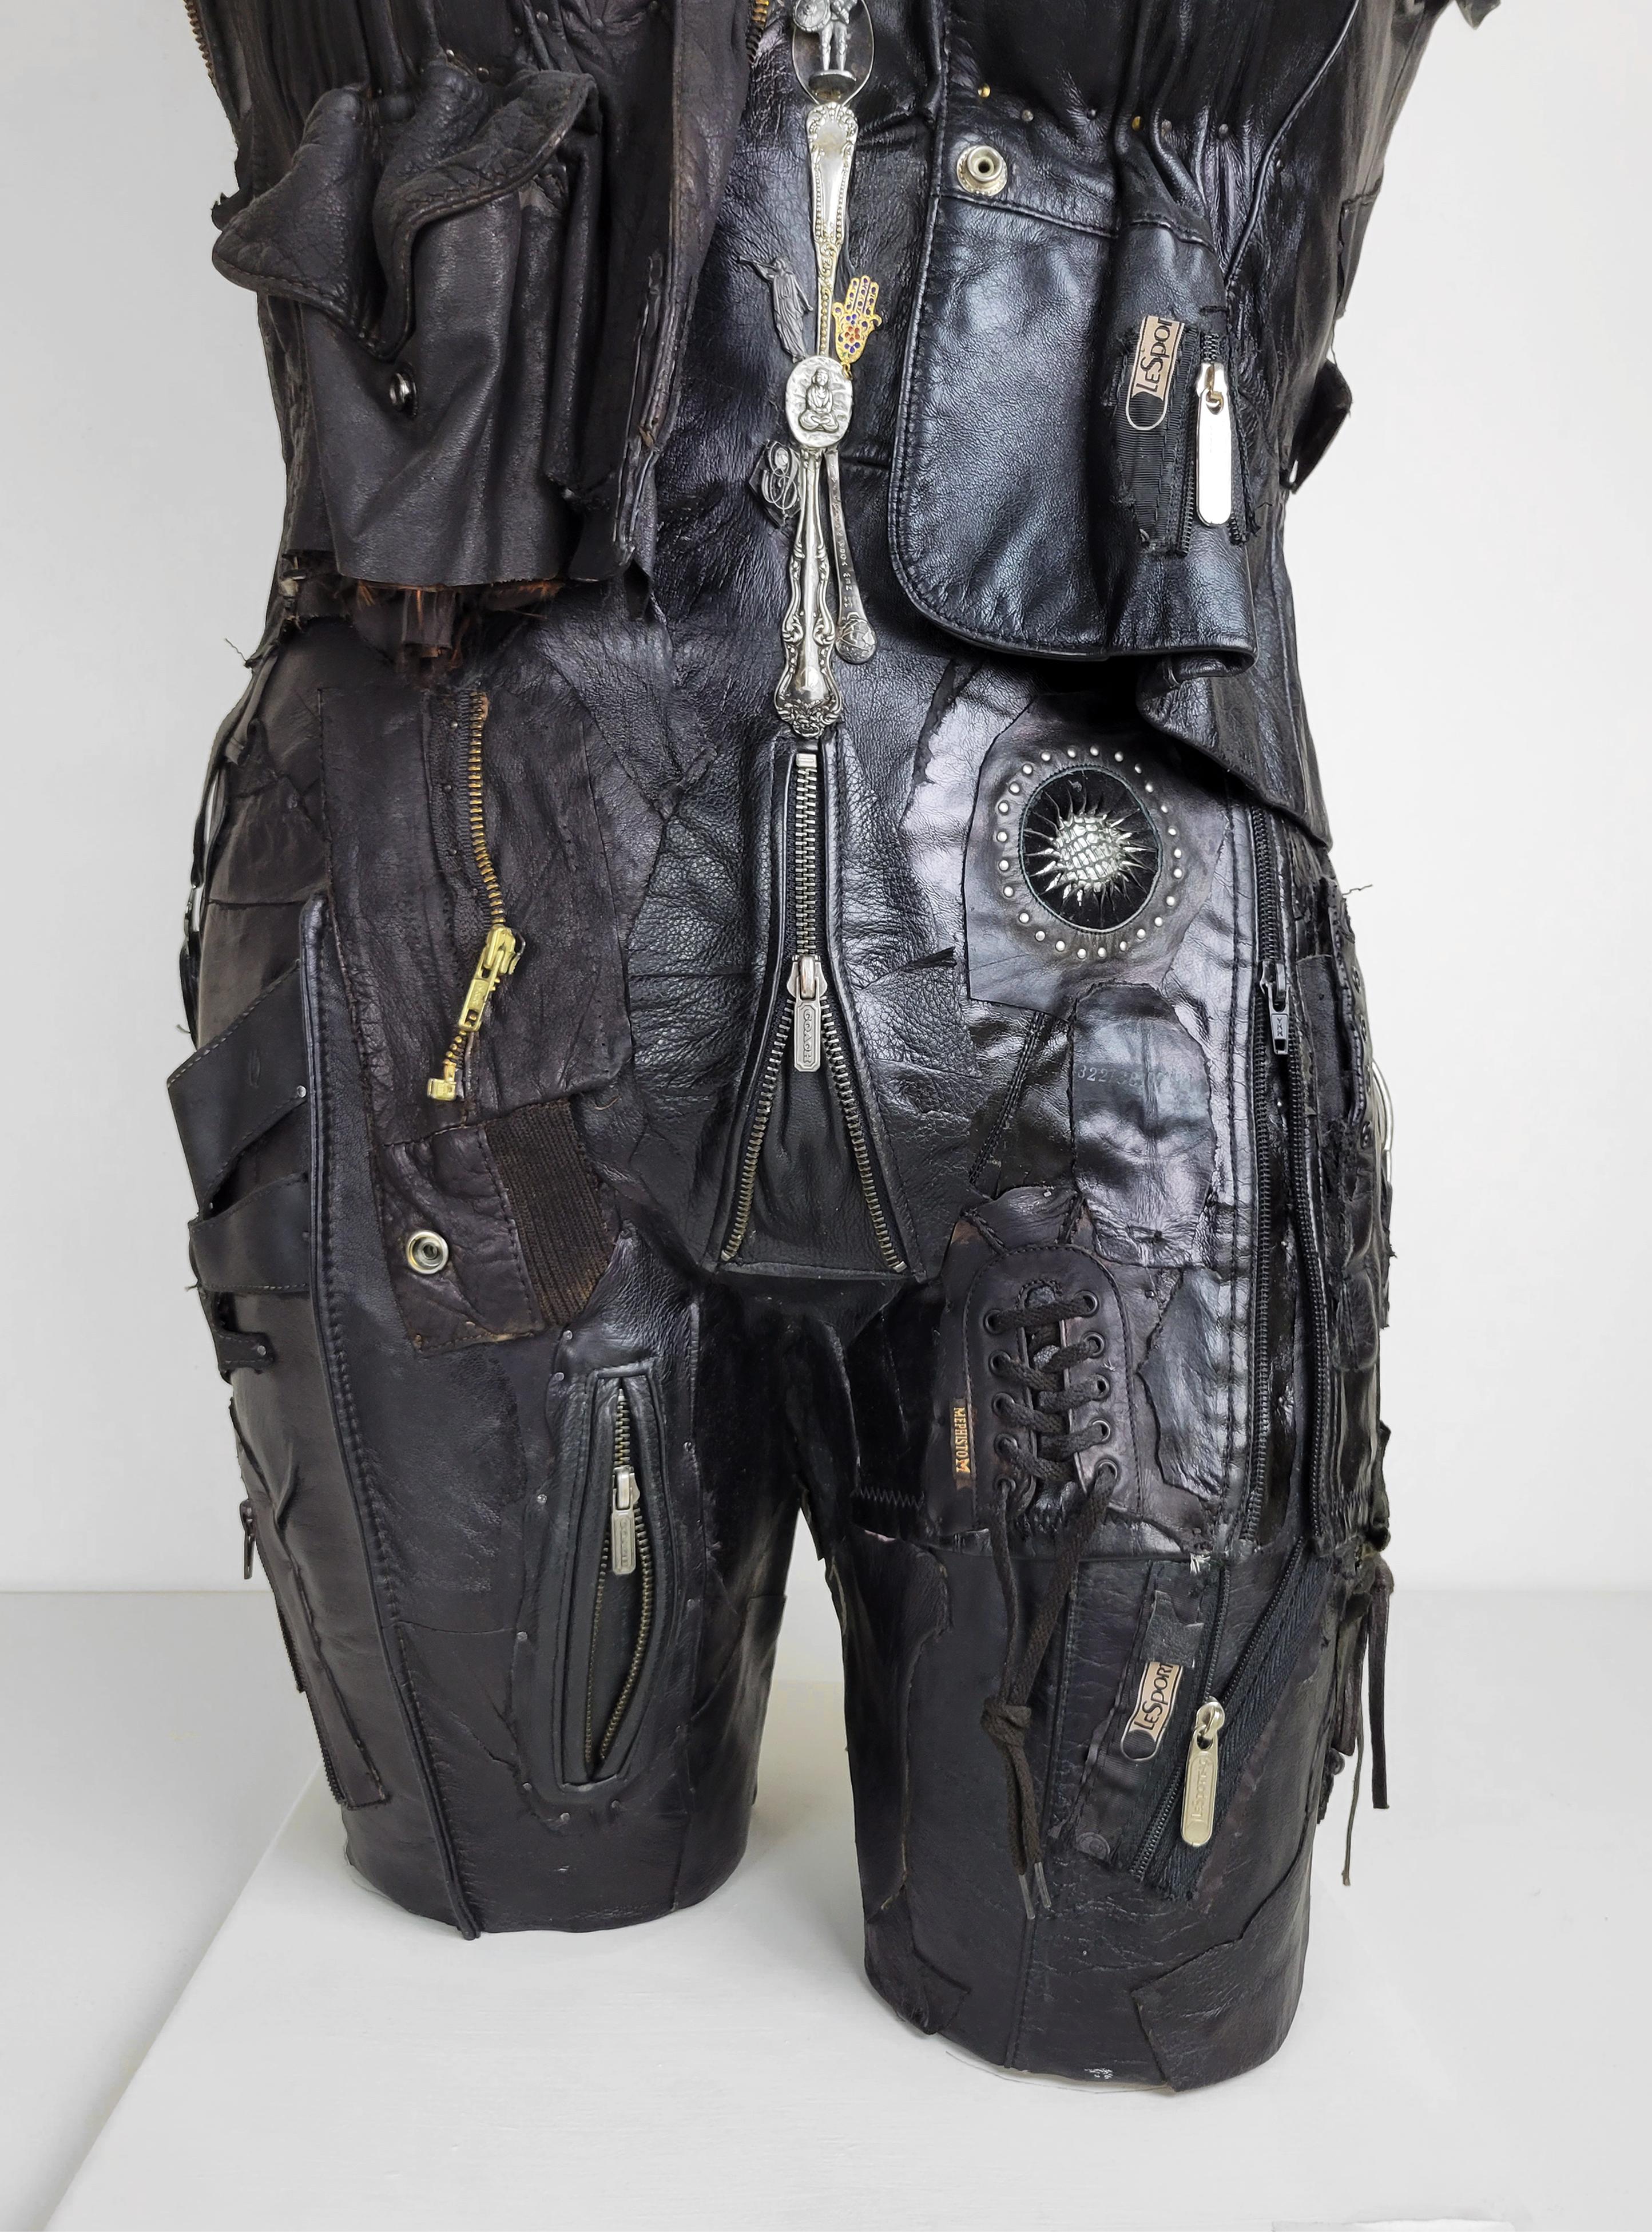 Linda Stein, On Call 707 - Feminist Contemporary Black/Silver Leather Metal Torso Sculpture 

Starting in 2007, the artist Linda Stein began to explore gender multiplicities and diversities in her sculptural series The Fluidity of Gender.  The